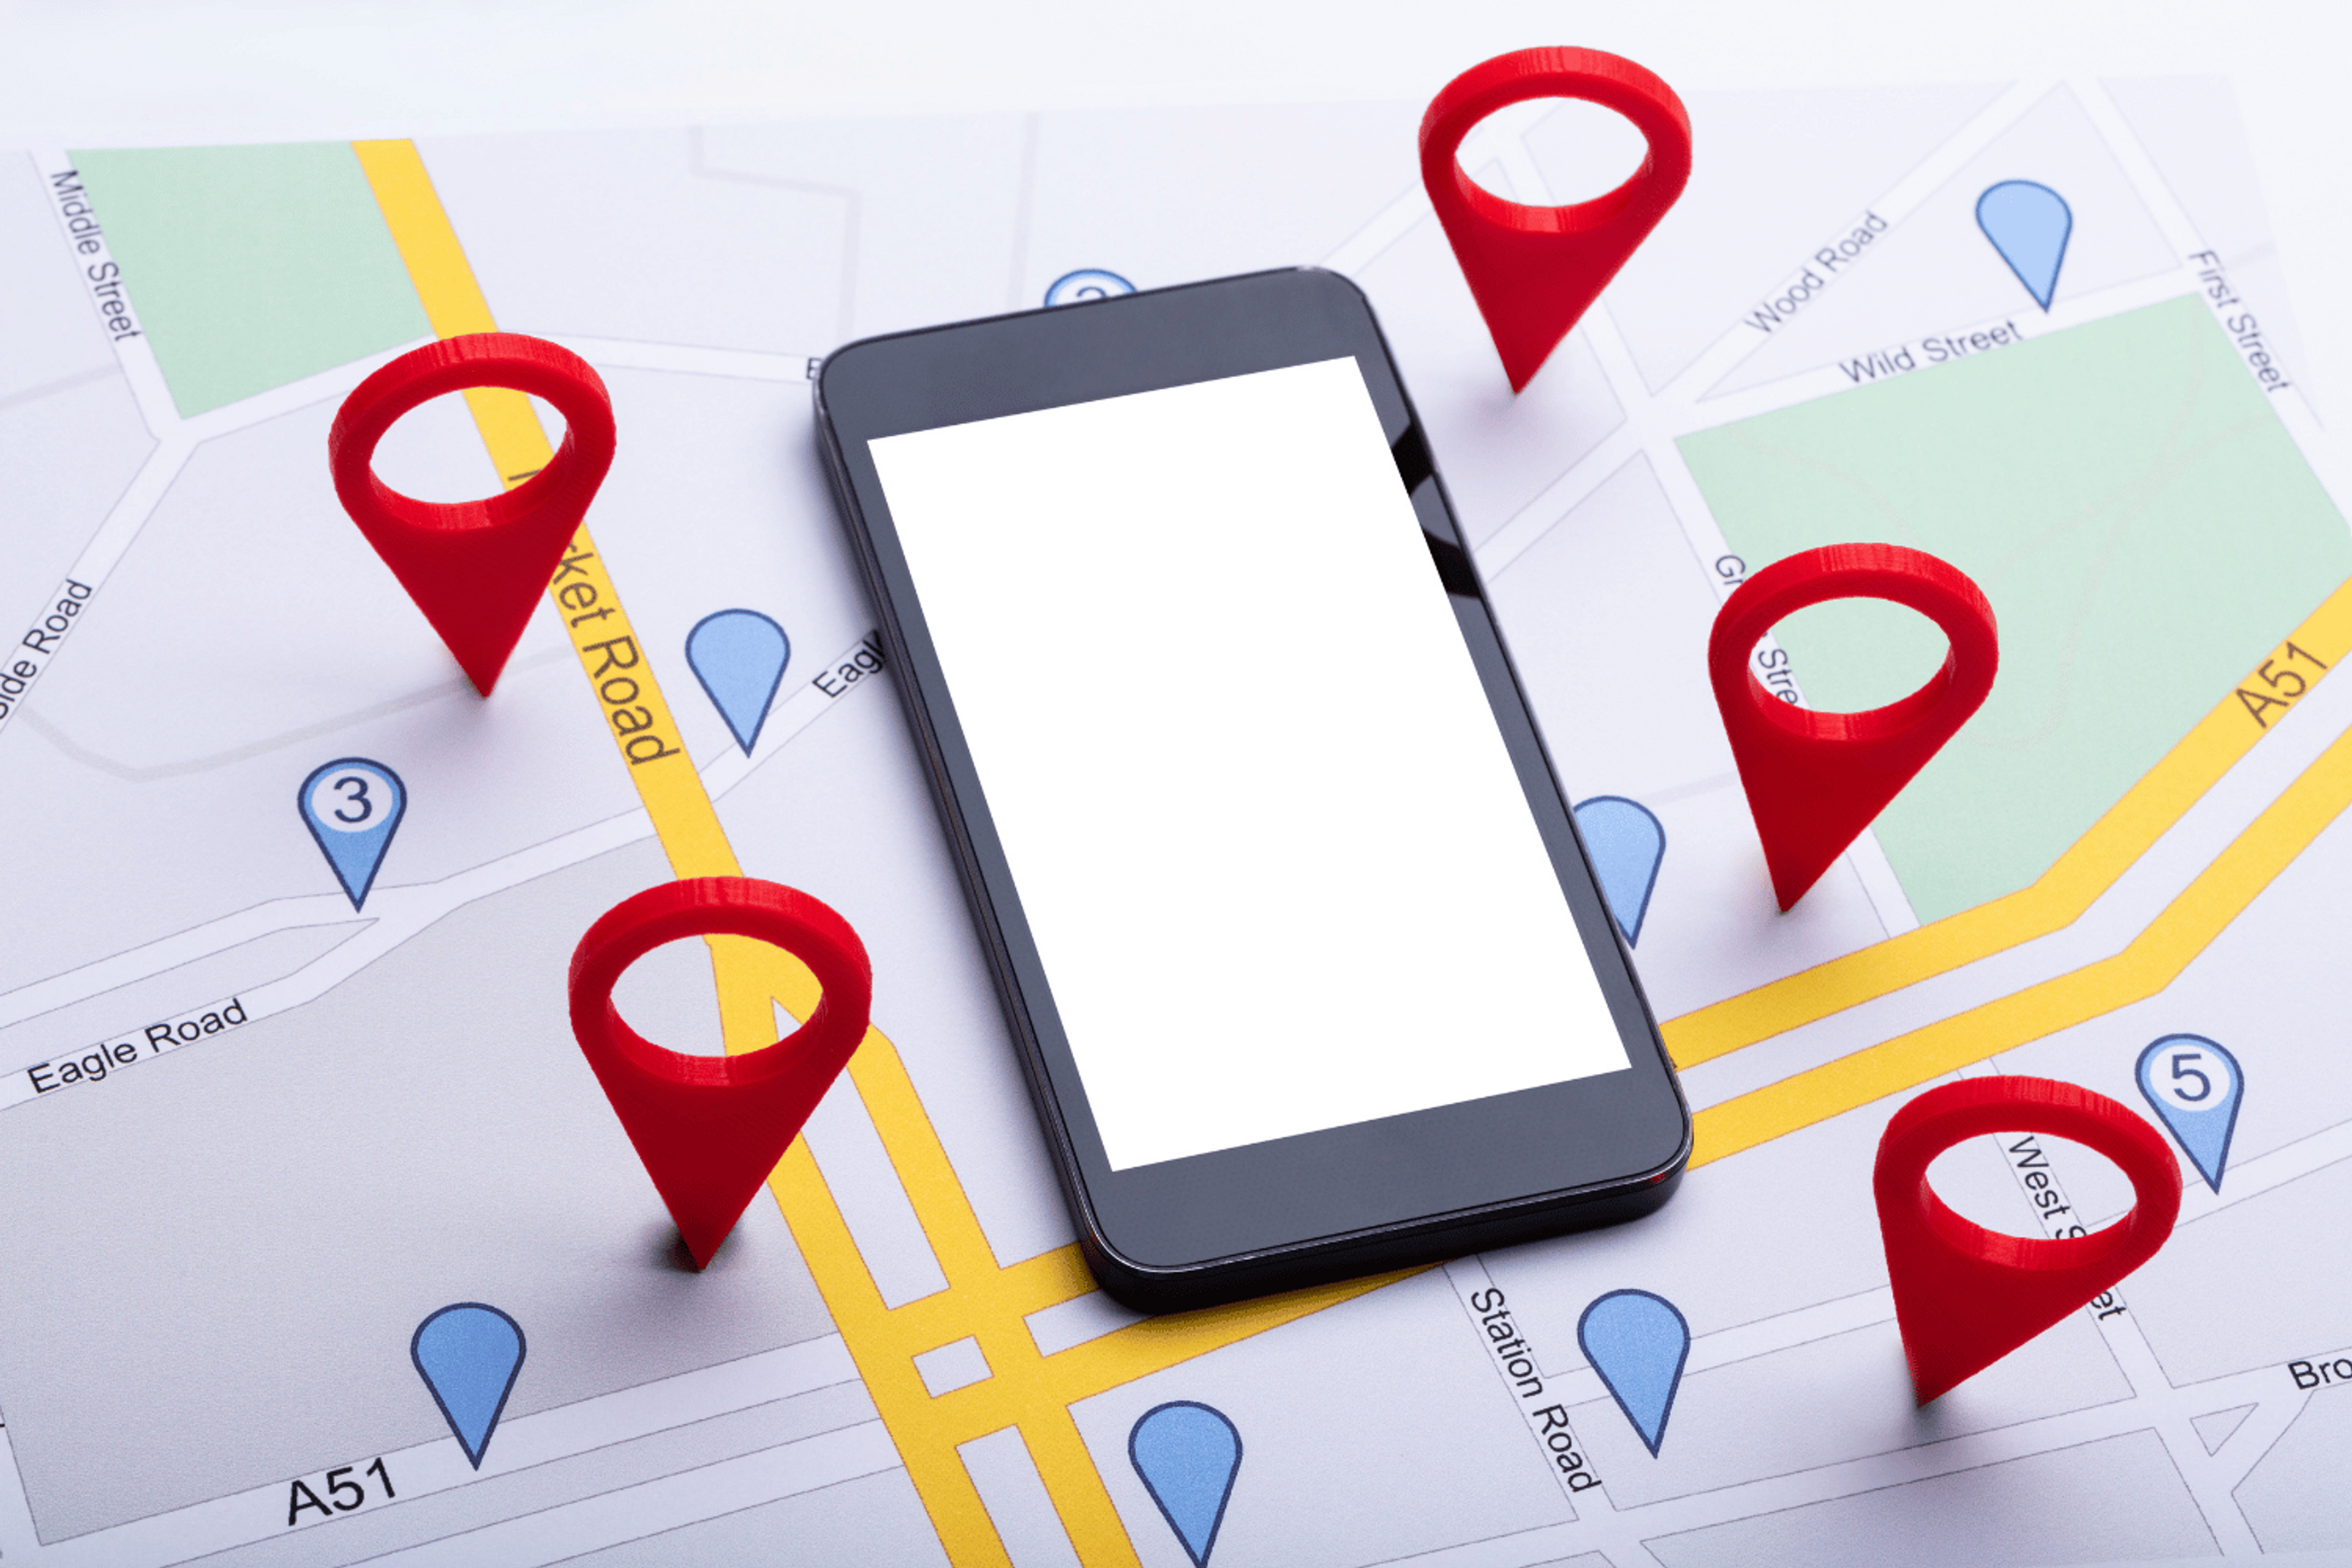 Smartphone featuring places on a map.